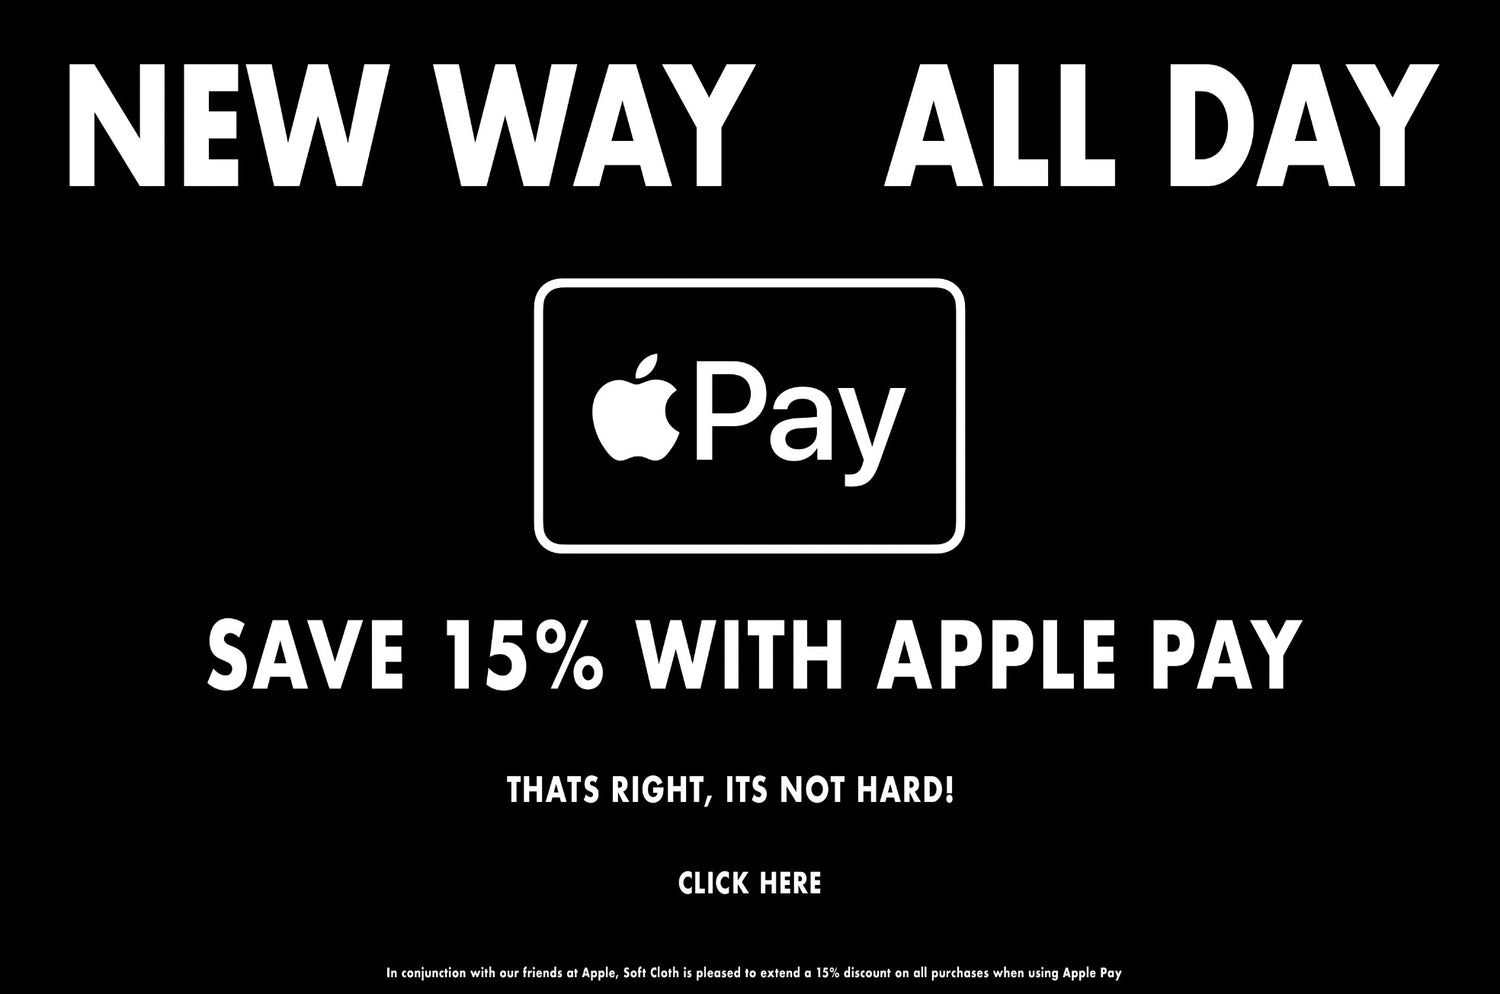 Save 15% with Apple Pay!